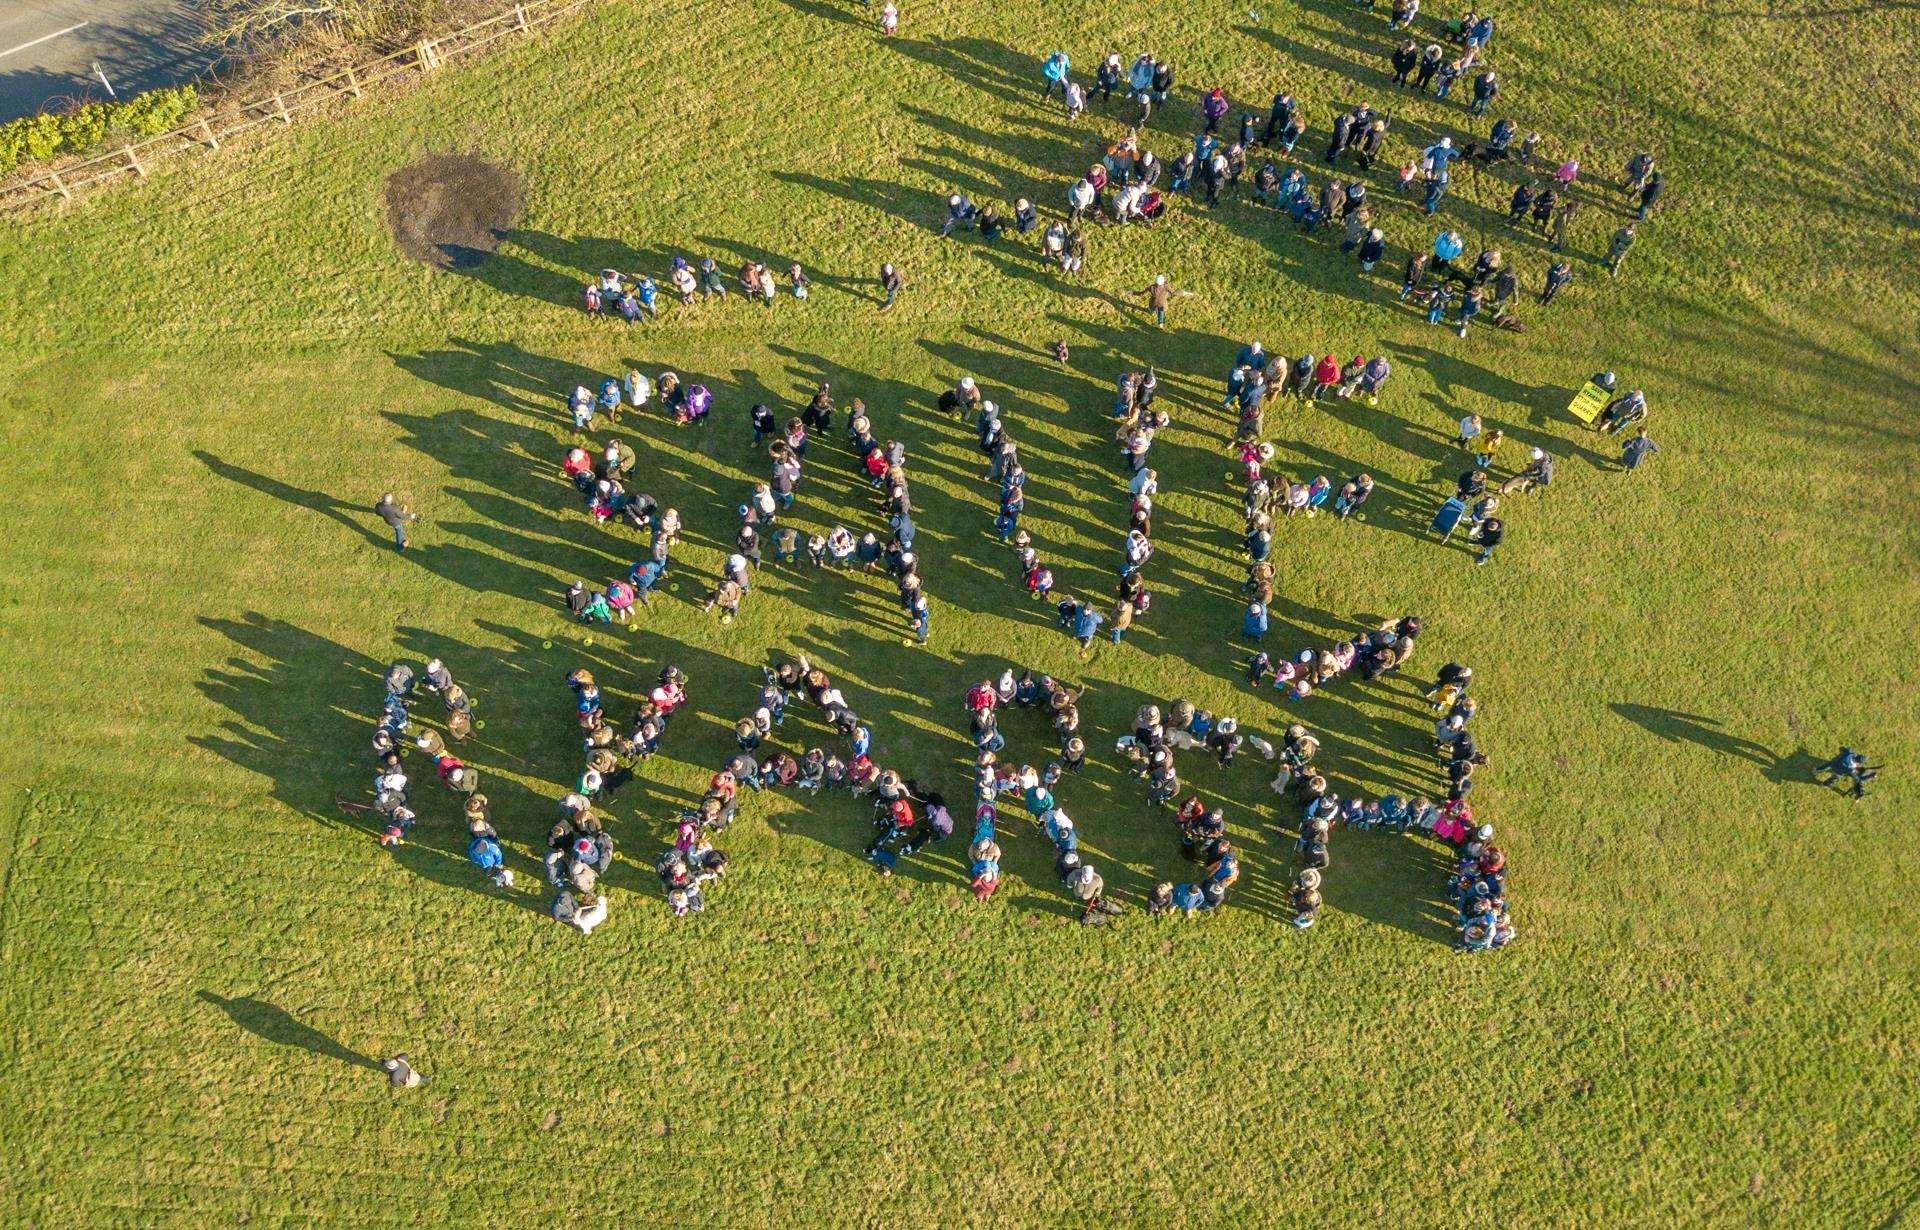 Ryarsh residents are up in arms over a proposed sandpit. Photo: Andy Betts (5588483)